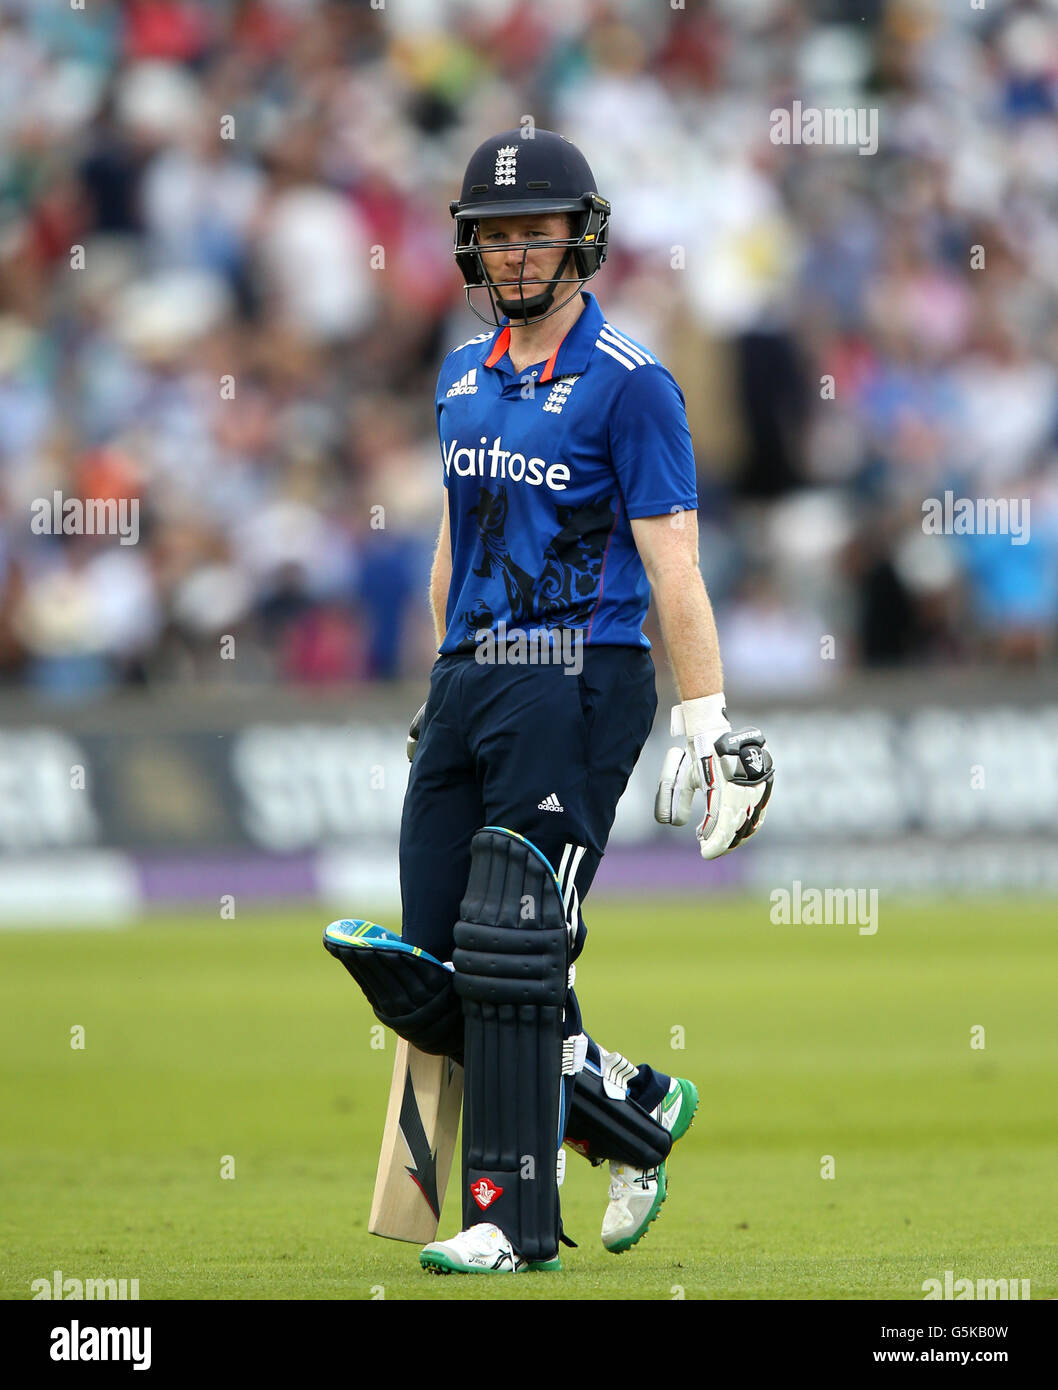 England's Eoin Morgan walks off after being dismissed by Sri Lanka's Nuwan Pradeep during the First One Day International at Trent Bridge, Nottingham. Stock Photo